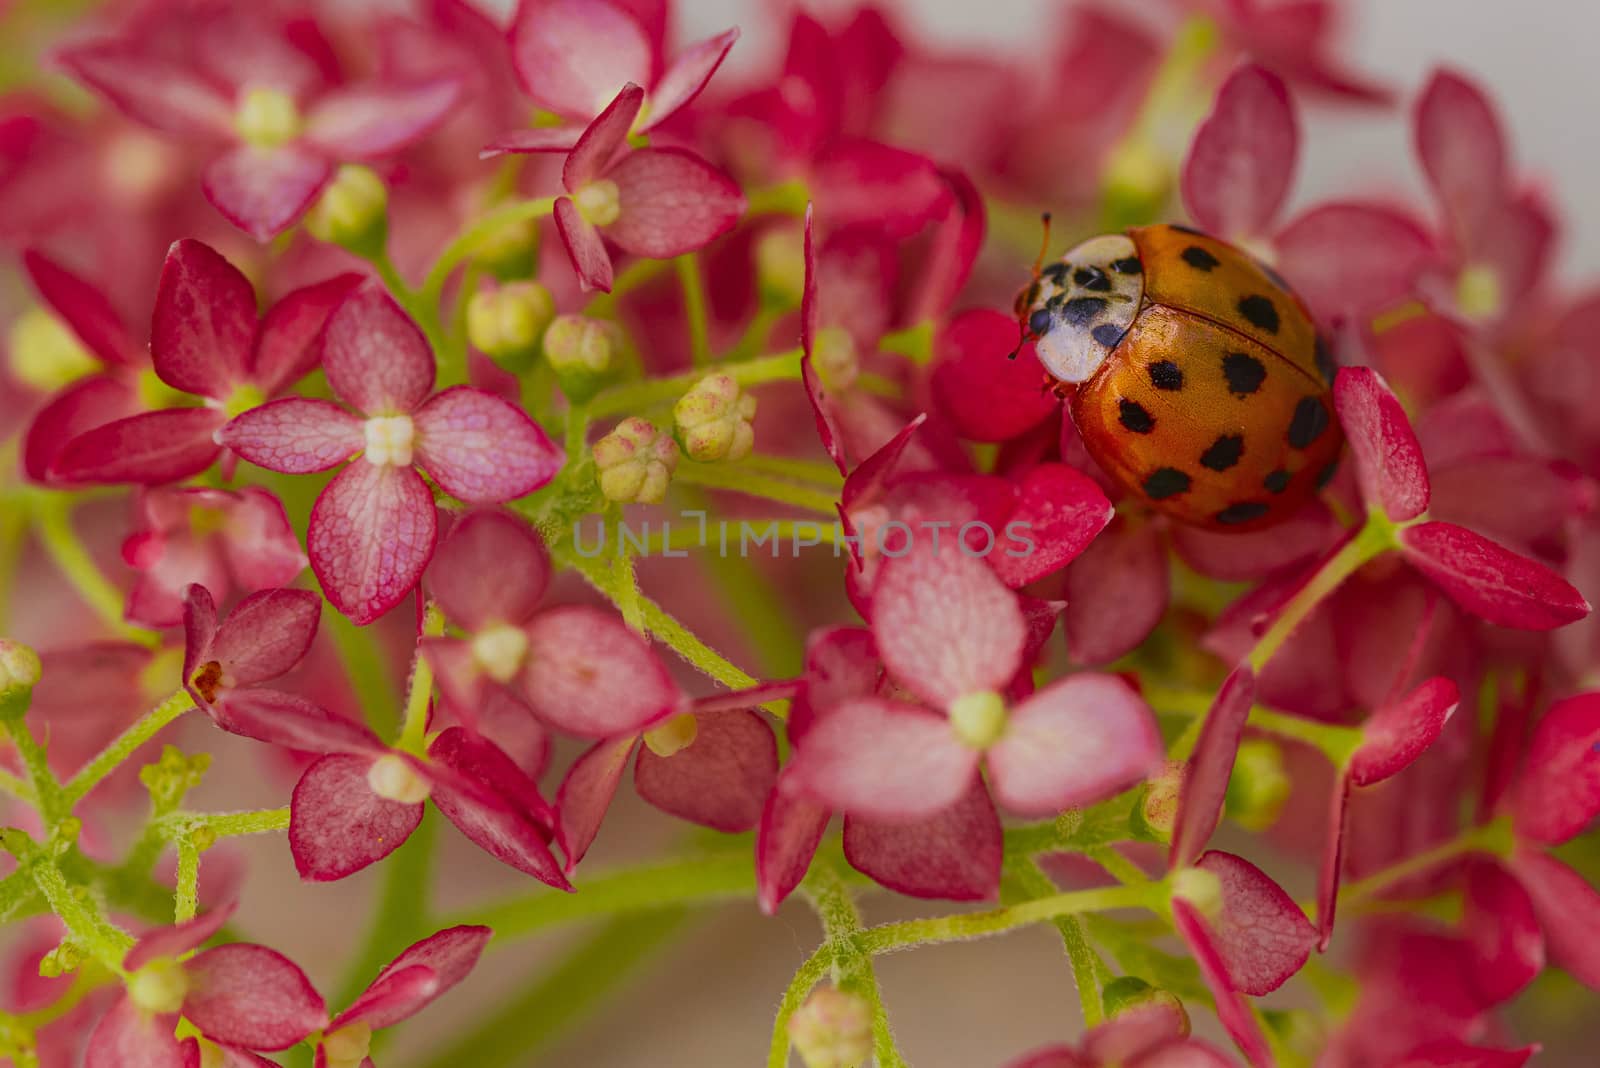 ladybug sits on a flower . Insects, ladybug close-up. Soft and selective focus.